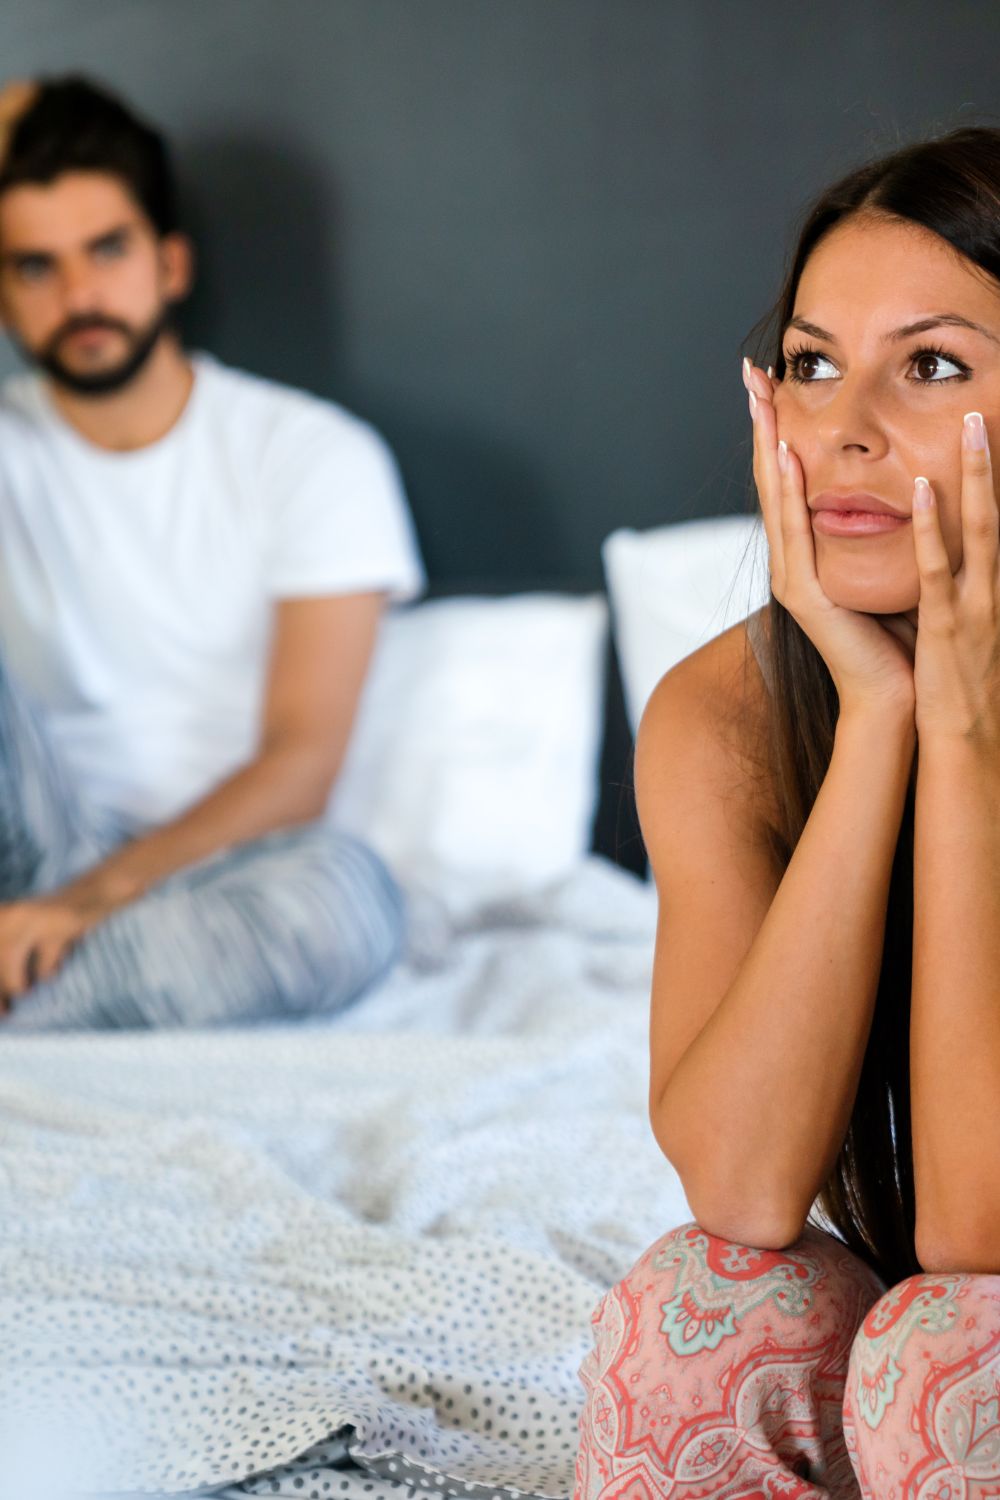 What does it mean if your husband rejects you sexually